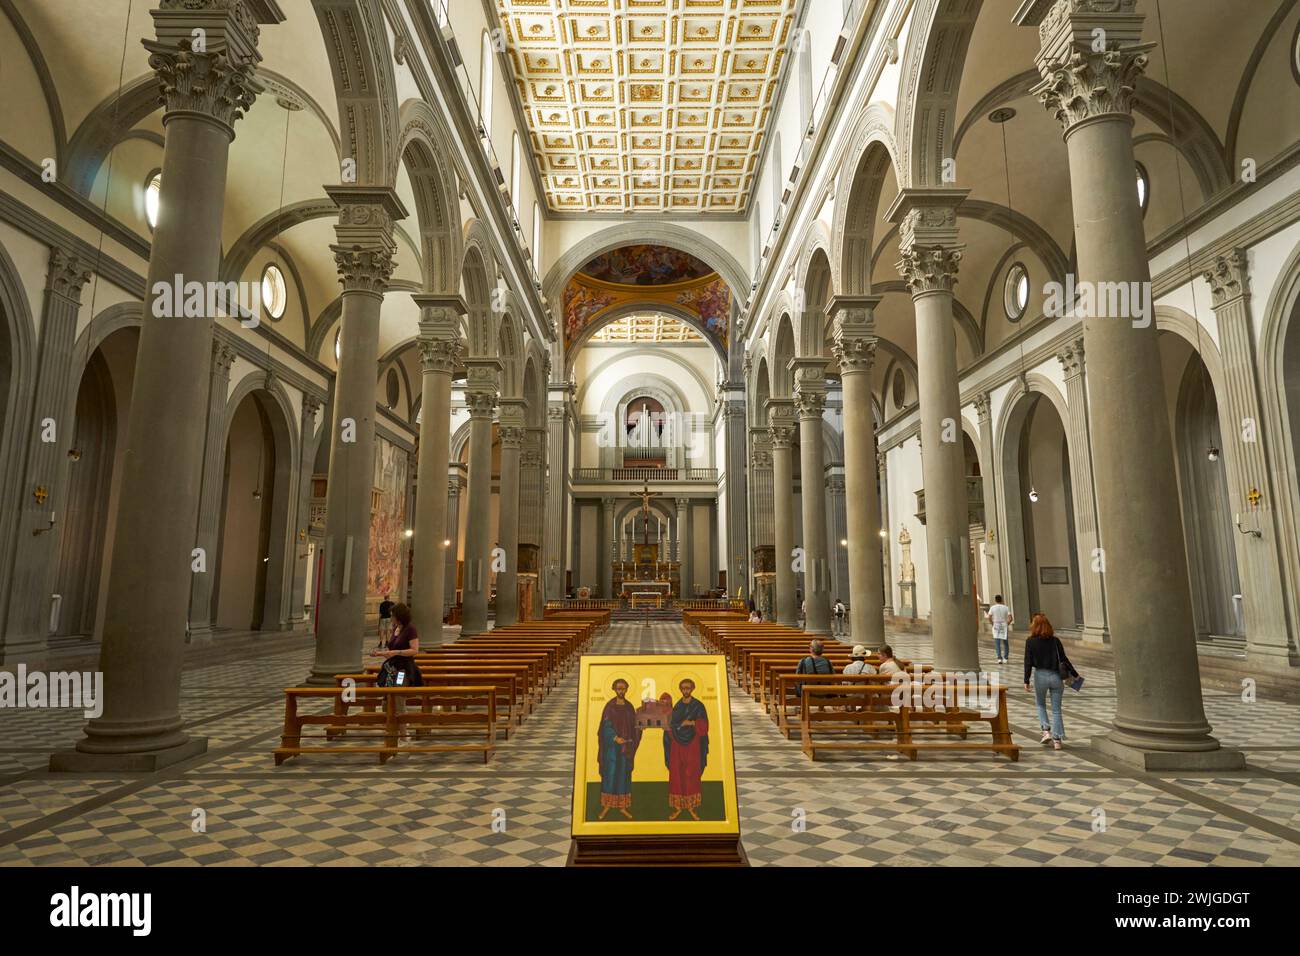 Interior of Basilica of San Lorenzo, Florence Italy designed by Filippo Brunelleschi with painting of Saint Cosmas and Saint Damian in foreground Stock Photo